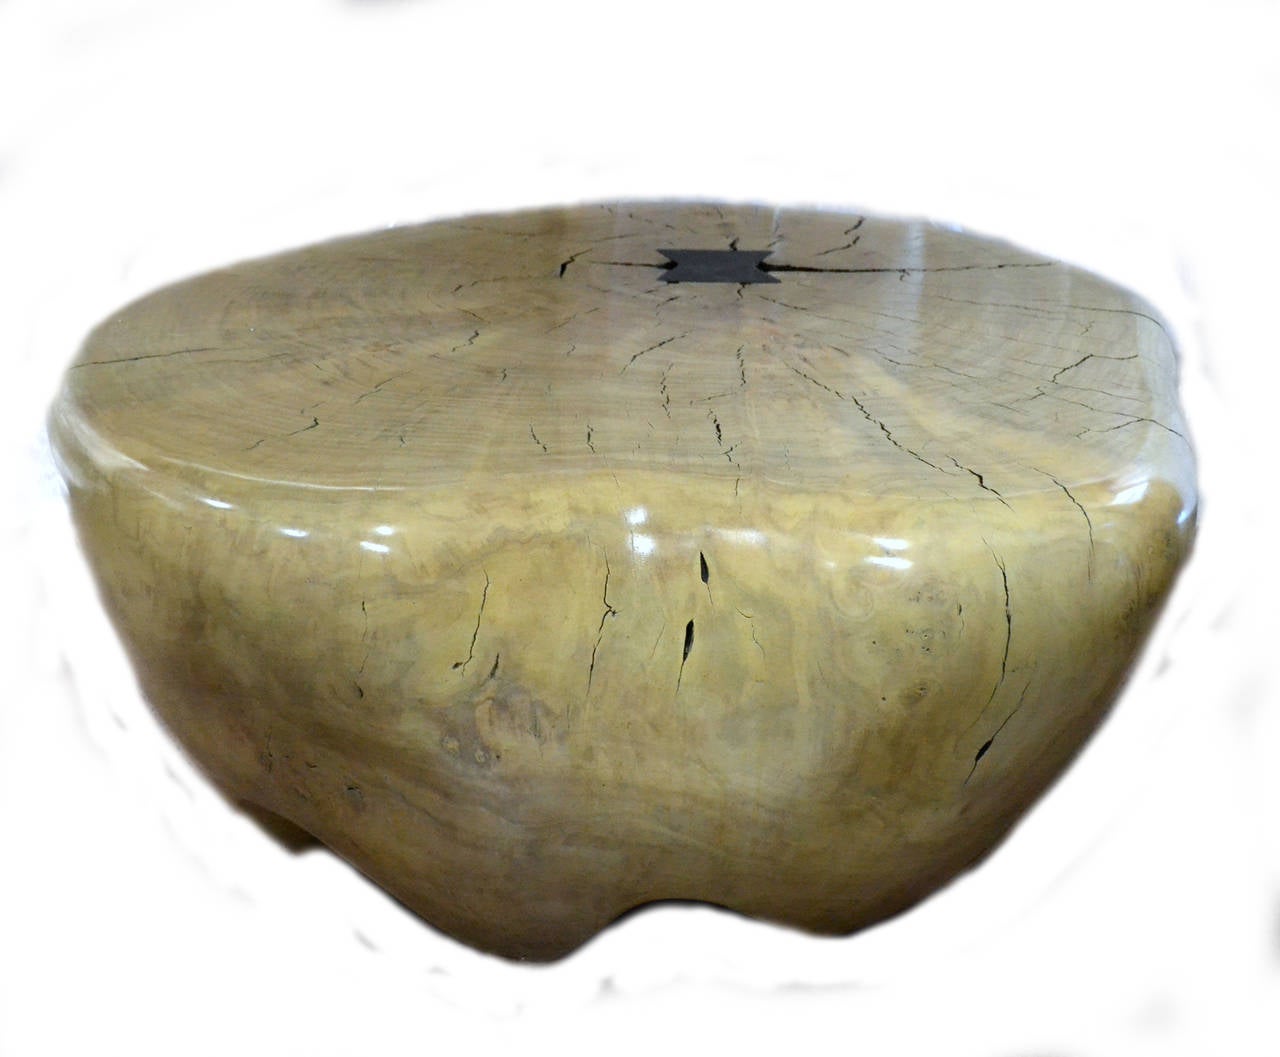 It is no wonder that artist Daniel Pollock's (b. 1952) sculptural designs are in such high demand. As in the case of this distinctive and elegant low table, created from cottonwood with an ivory finish and unique form, he uses only reclaimed and